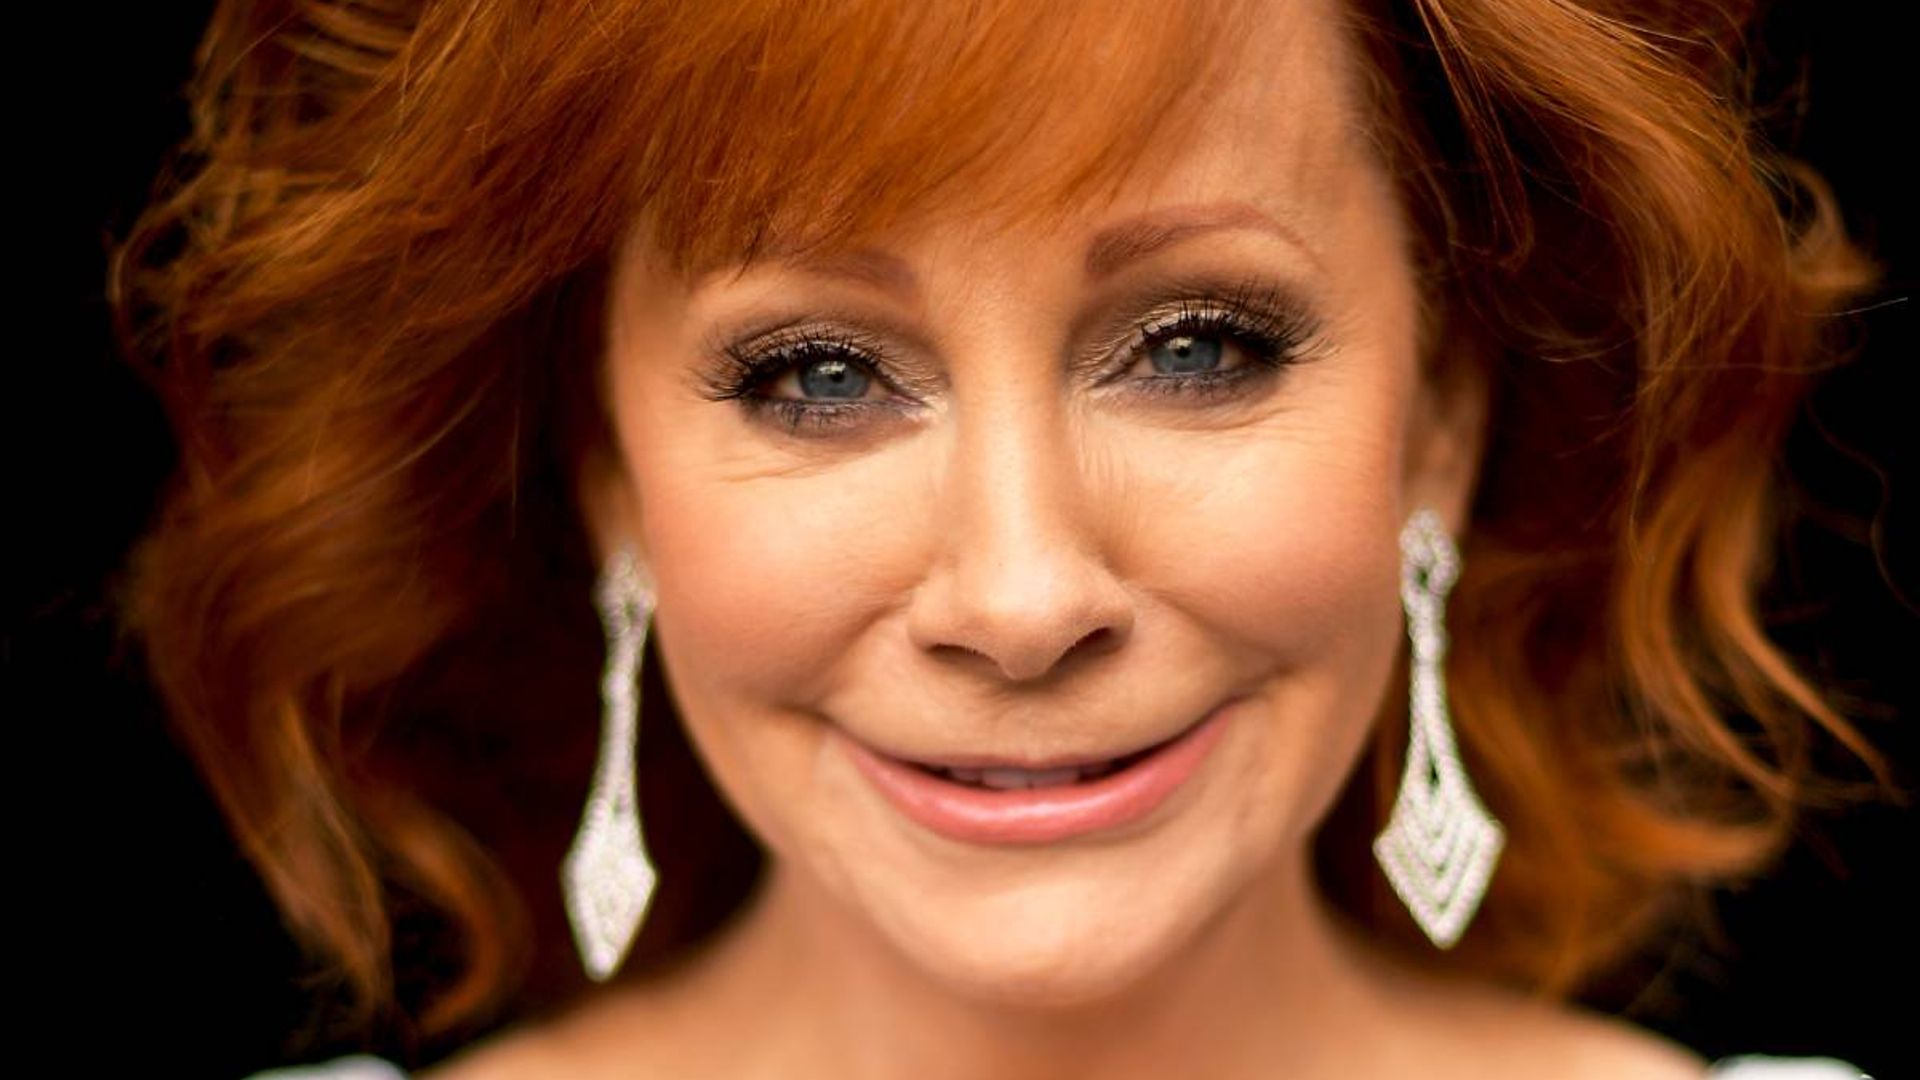 Reba McEntire delights fans with exciting career-related news